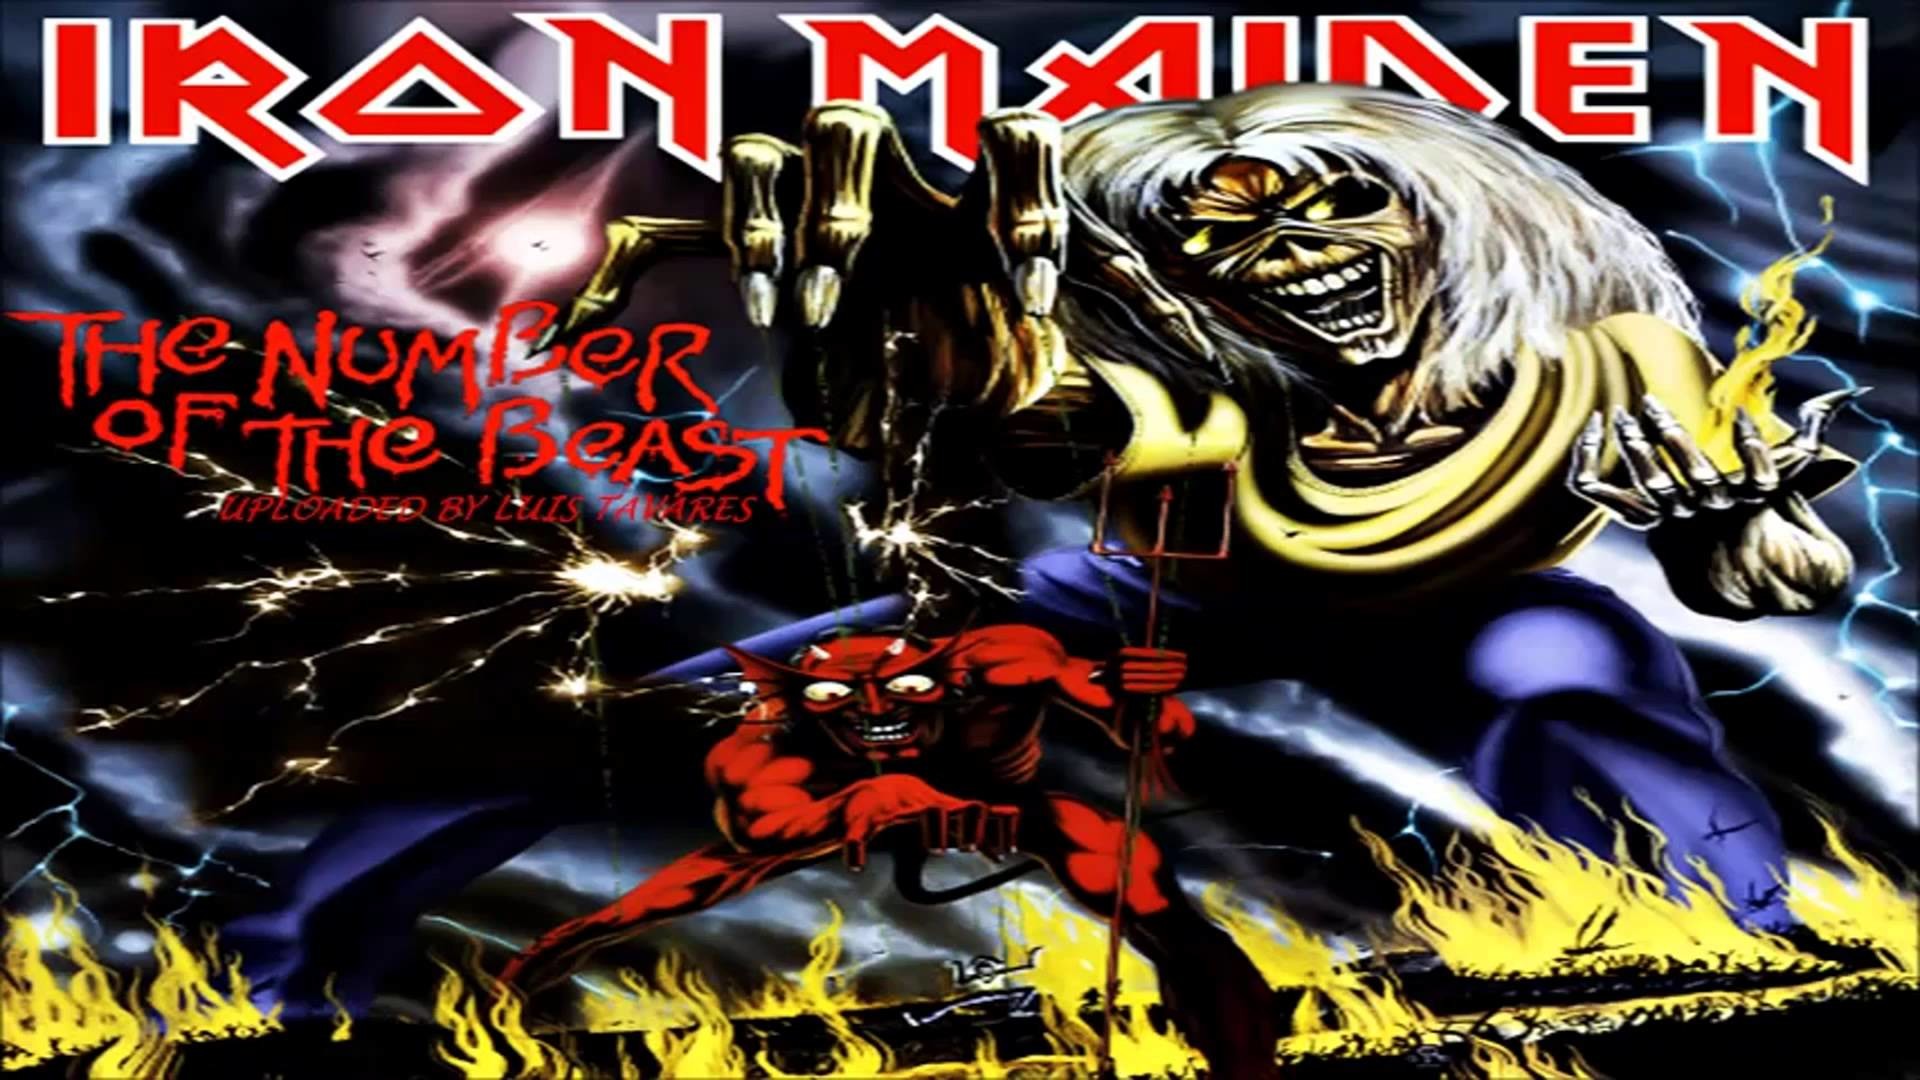 1920x1080 Iron Maiden Number Of The Beast Wallpaper High Quality Resolution As Wallpaper  HD